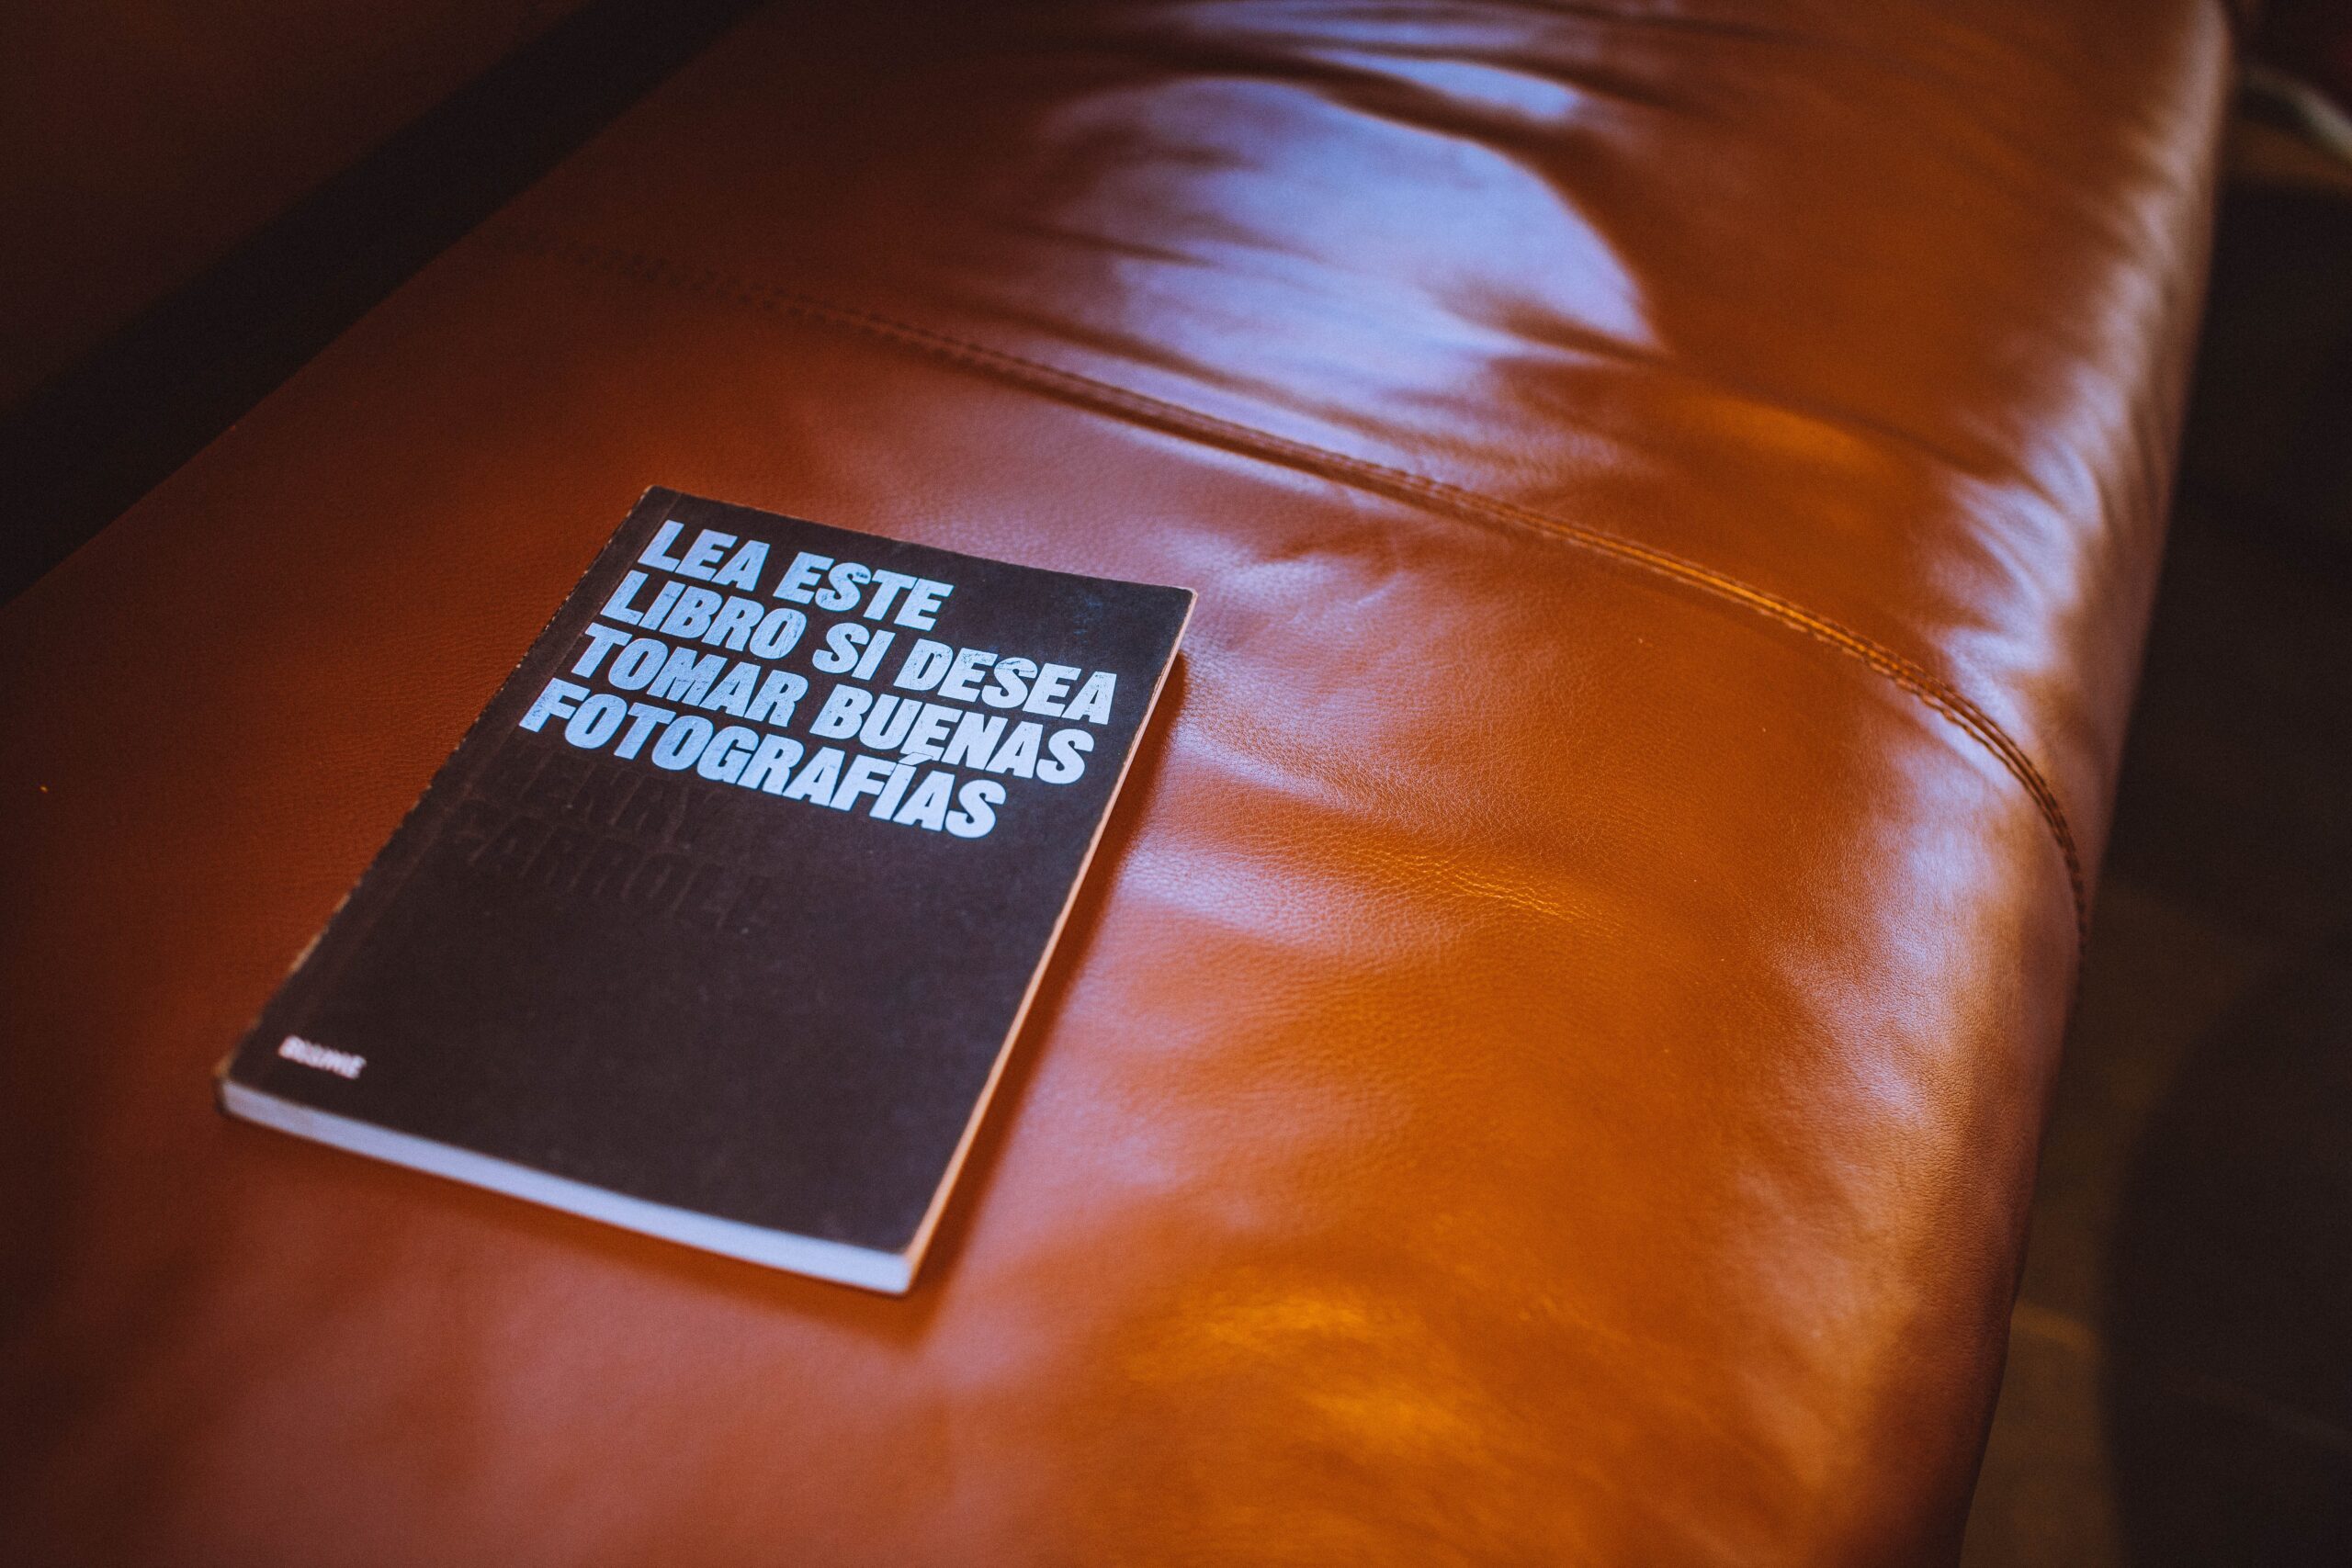 Lab Leather sofa with photography book on it. Symbolic image for my article: Lab-Grown Leather: A Sustainable Future for Fashion and Technology.